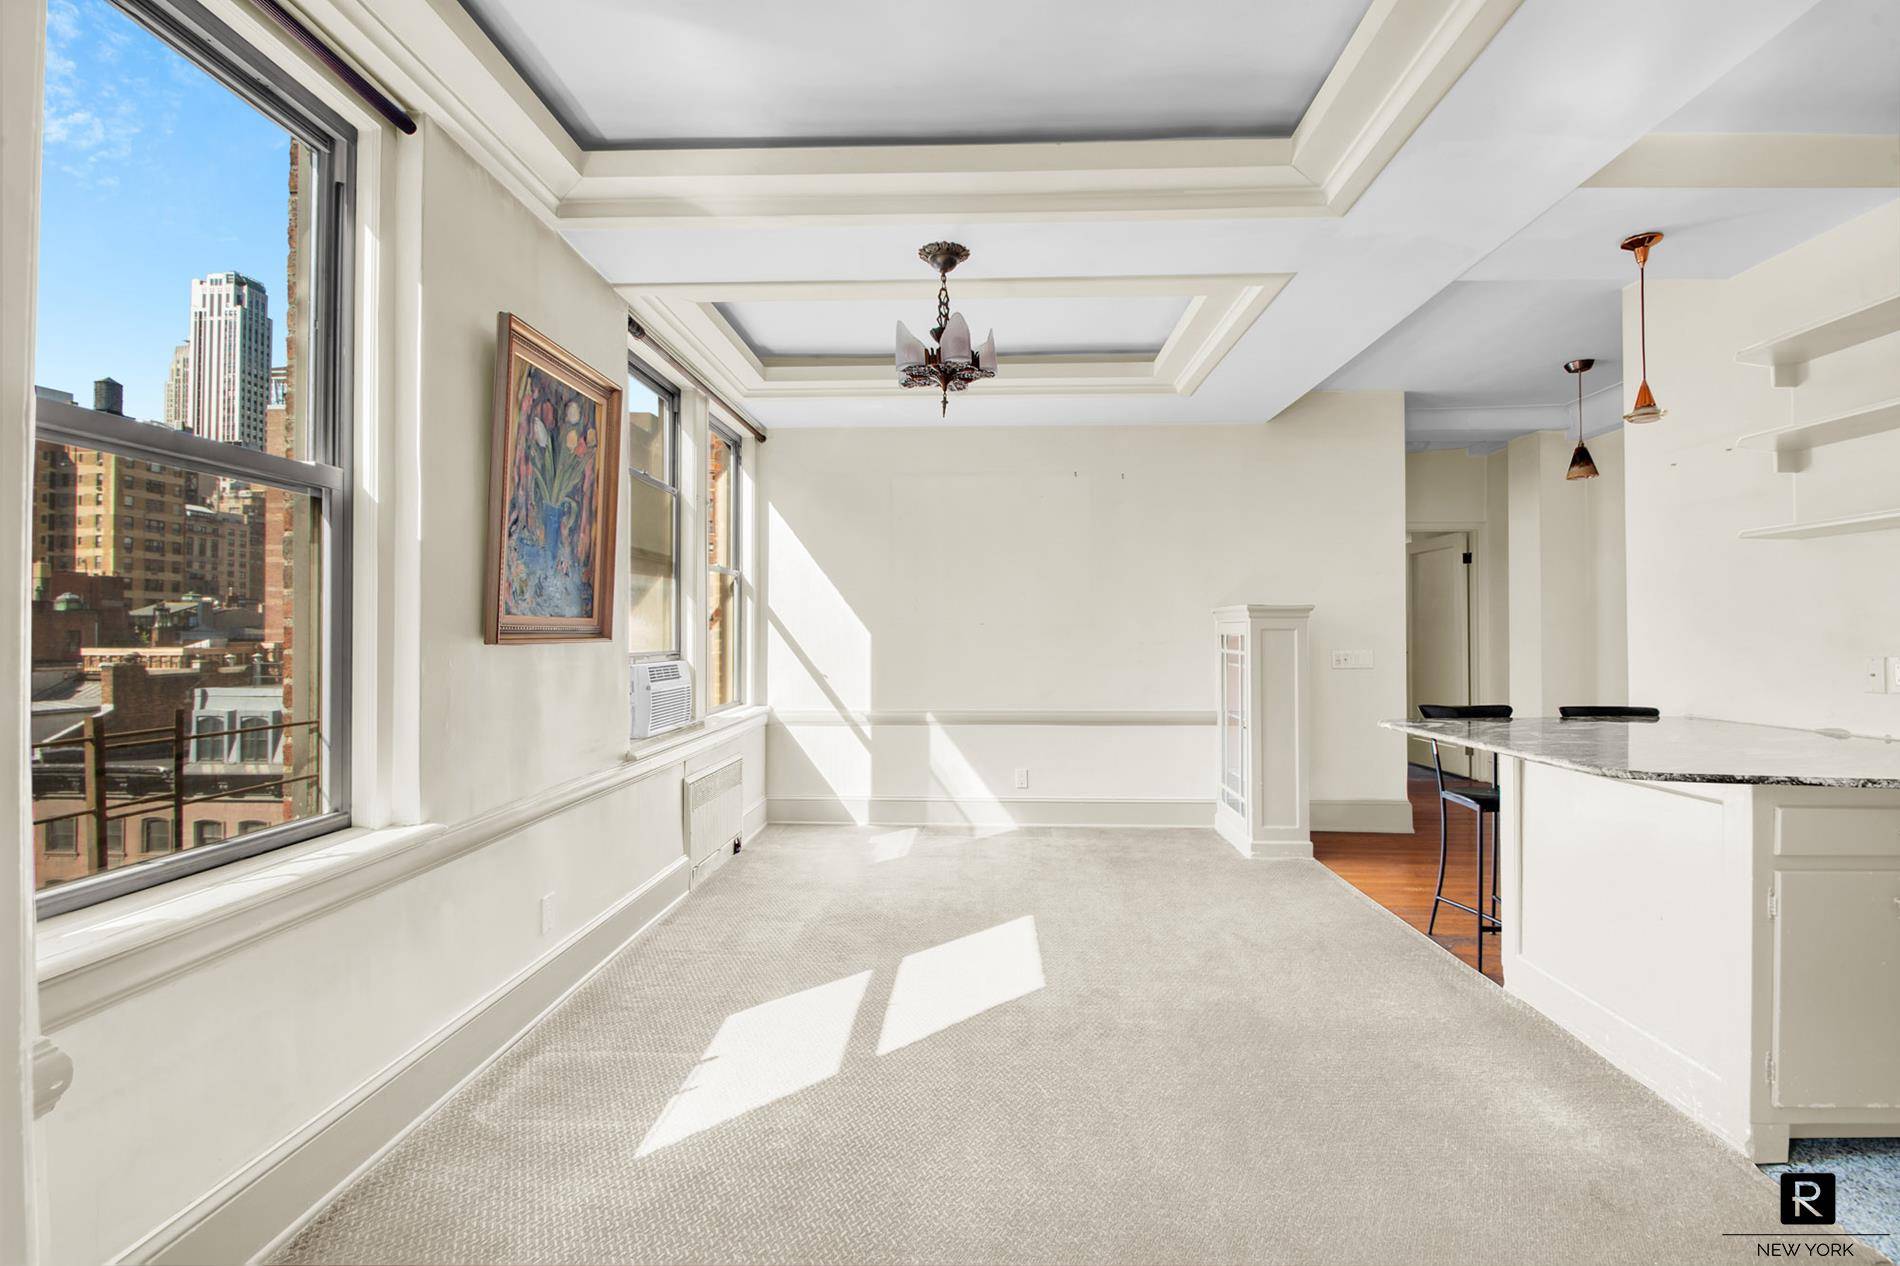 Space, Light, Views ! This rare, sun drenched prewar 3 4 bedroom, 2 bathroom apartment offers the perfect blend of historic charm and modern potential featuring hardwood floors, prewar details ...